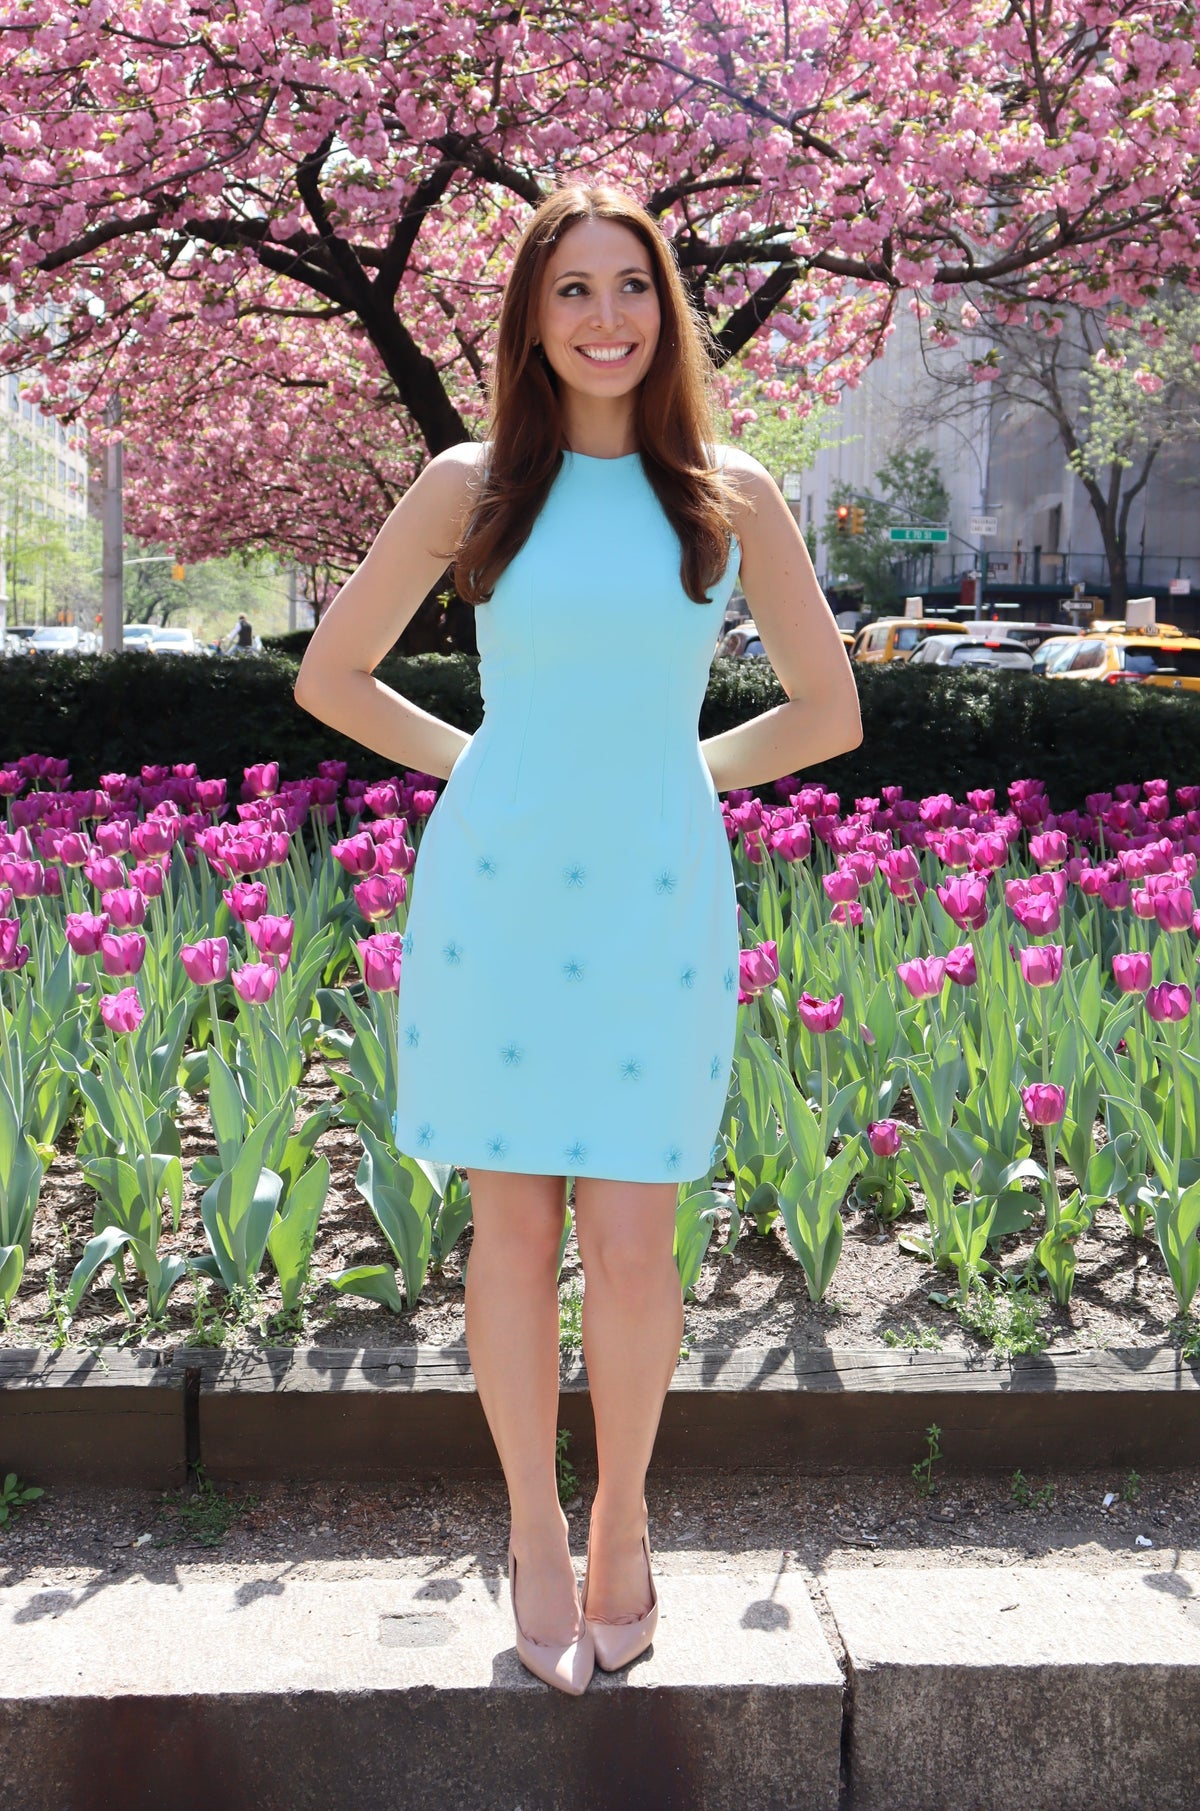 Model smiling and wearing a short aqua dress with aqua daisy appliques in front of purple tulips on Park Ave.